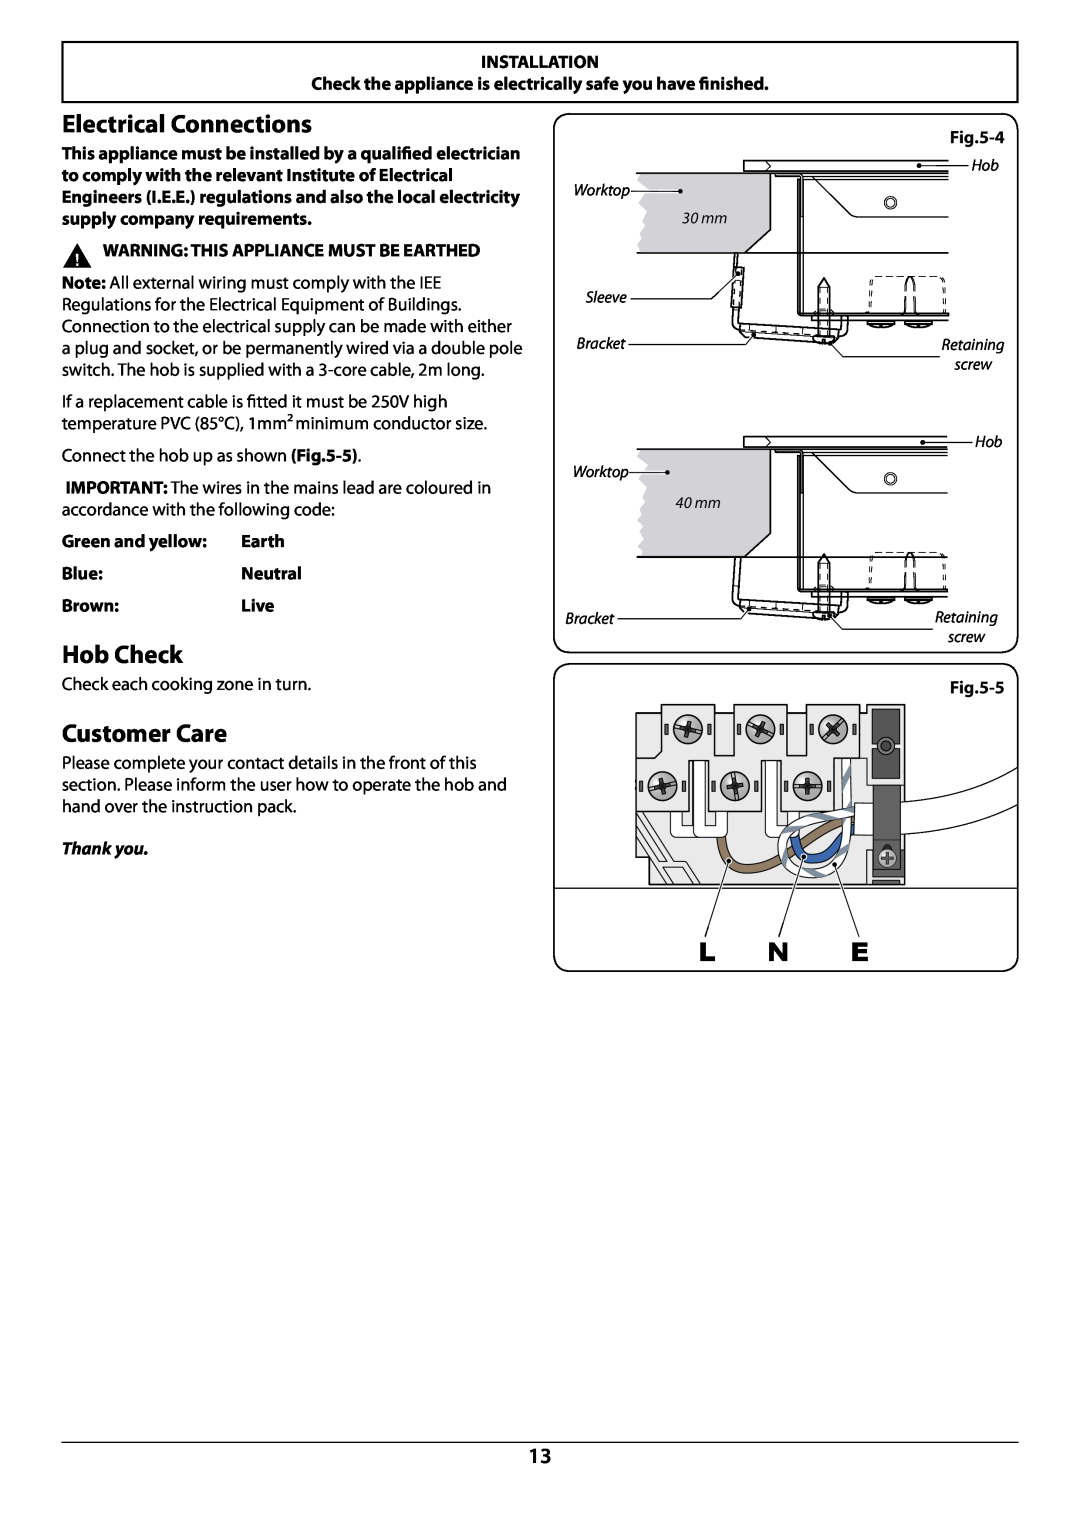 Rangemaster RC77 manual Electrical Connections, Hob Check, Customer Care, L N E, 4, Thank you 